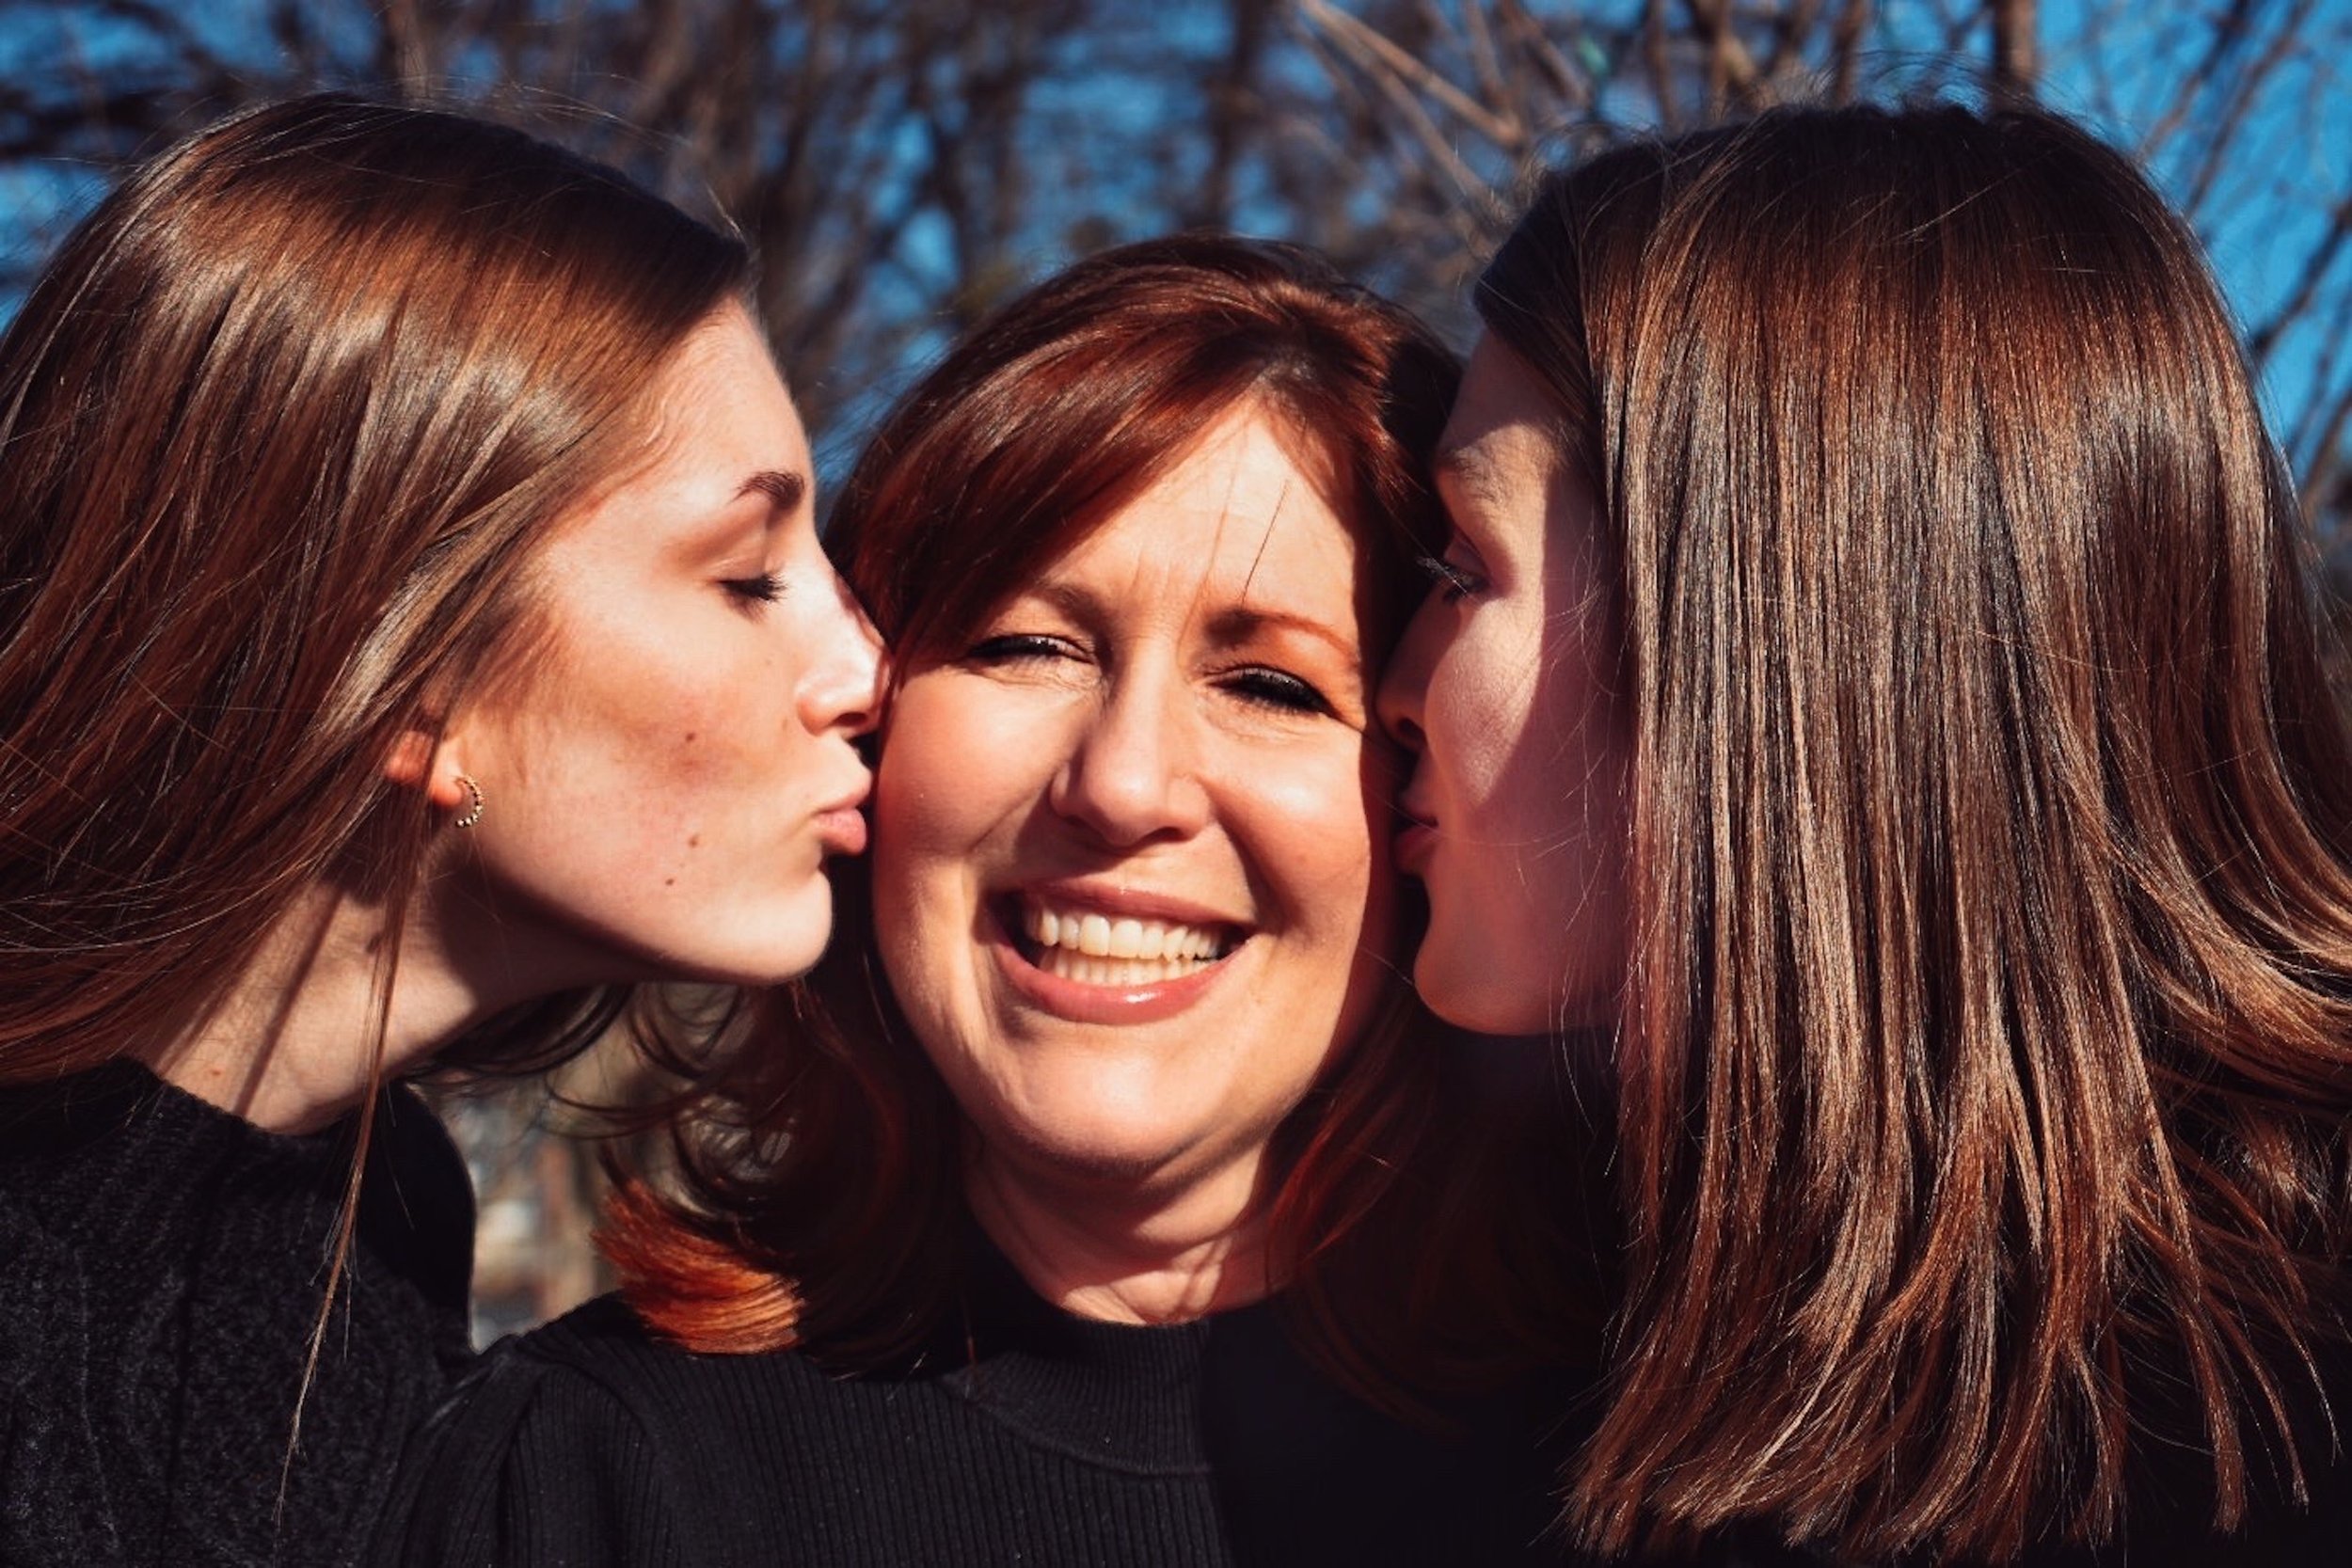  Three female-presenting Caucasian people in an outdoor setting. The person in the center is the oldest, probably the mother of the other two. On each end, the two younger people are kissing the center person on the cheek. The person in the center ha